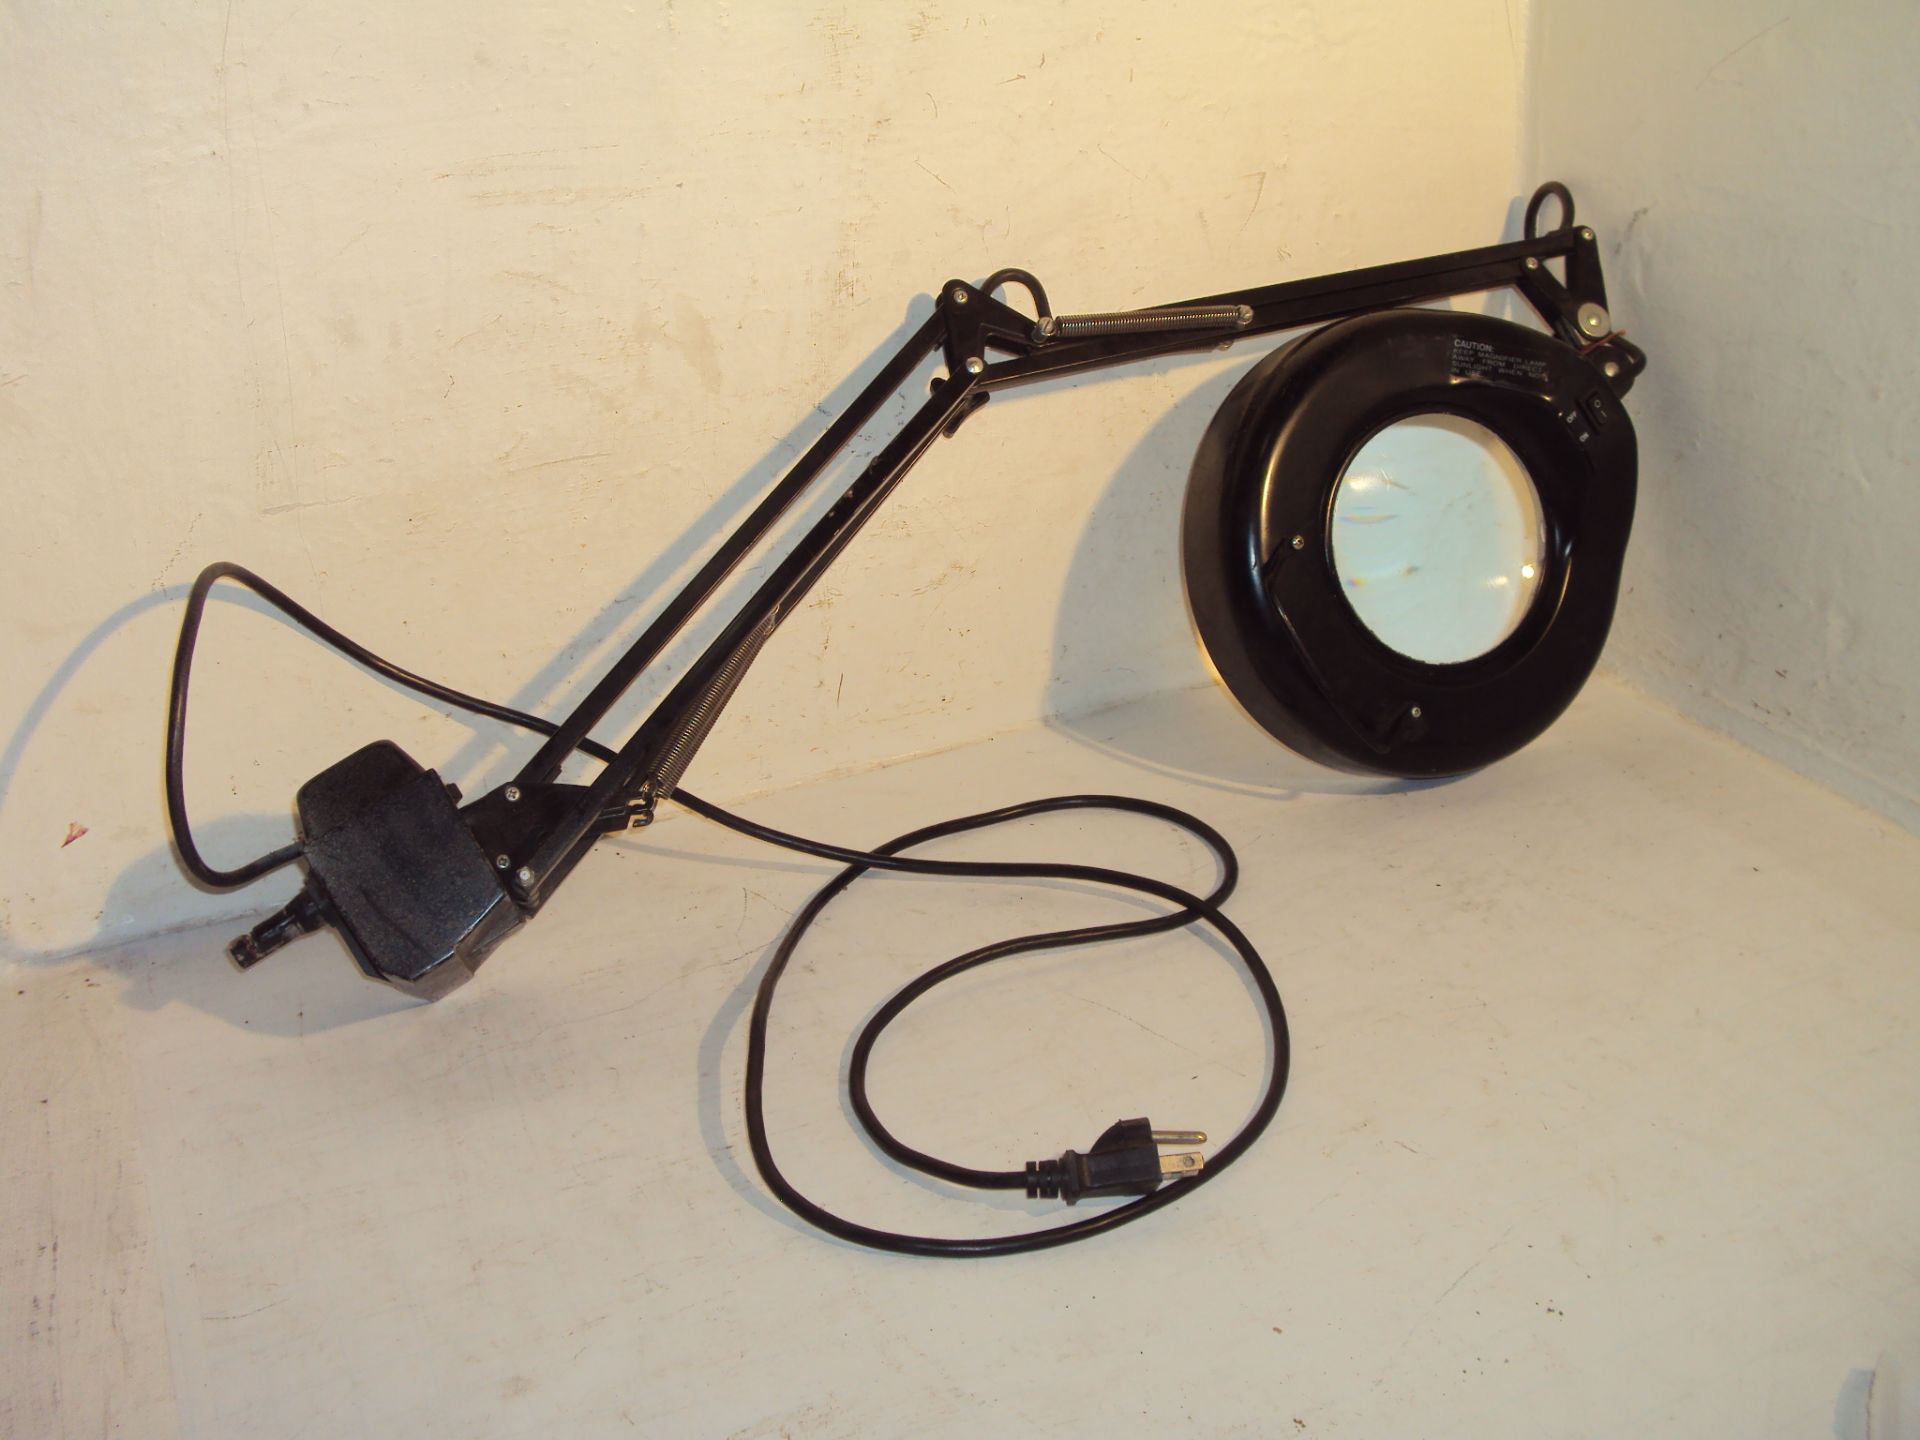 Articulating Arm Lighted Magnifier - Image 2 of 5